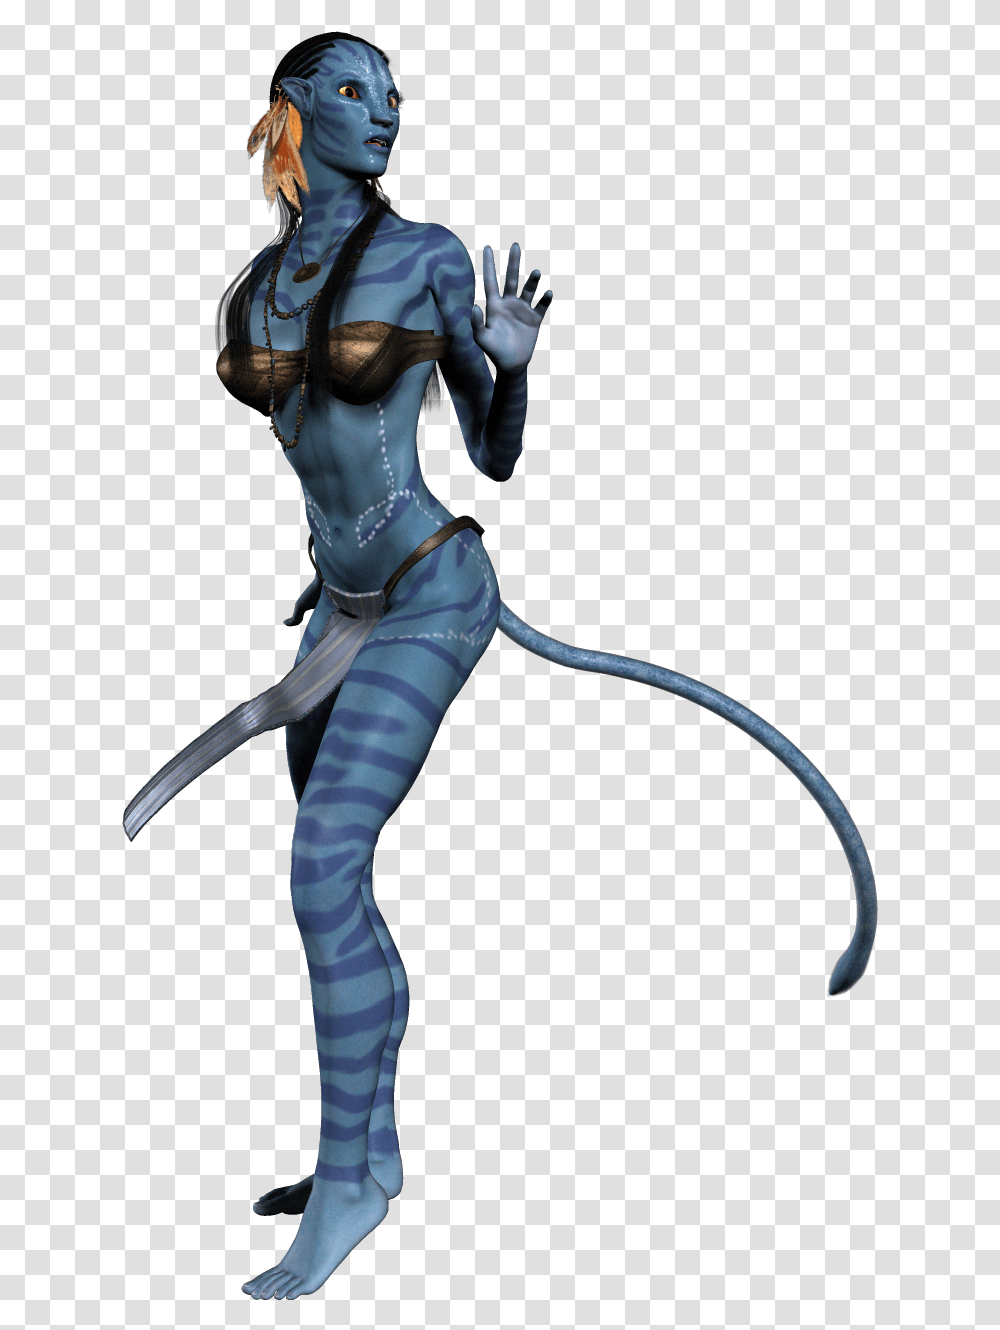 Download Hd Avatar Neytiri Image Avatar Movie, Person, Human, Bow Transparent Png